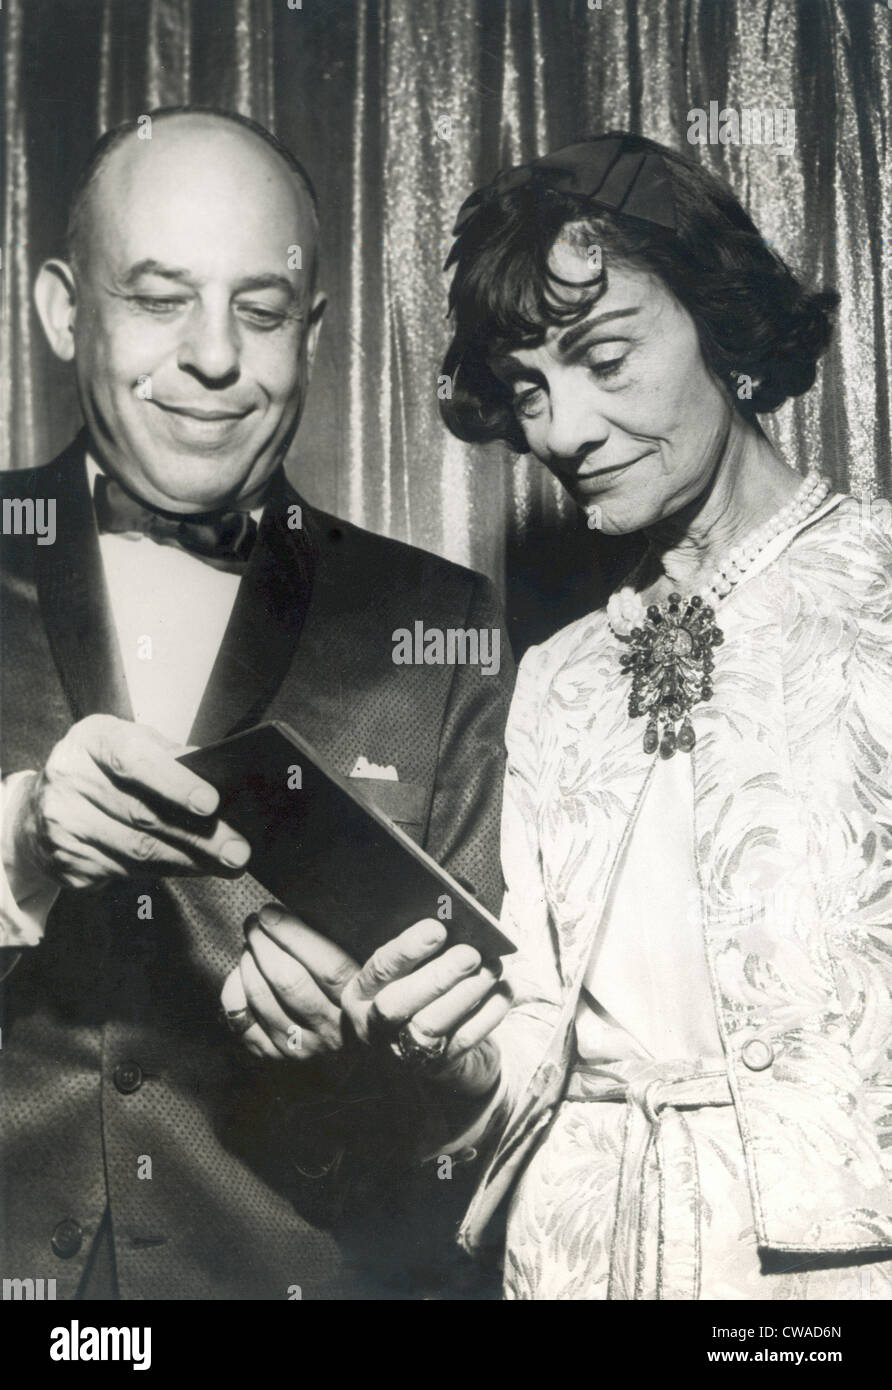 GABRIELLE 'COCO' CHANEL, being presented an award, c. early 1960s (date  stamped on the press photo is 1965). Courtesy: CSU Stock Photo - Alamy